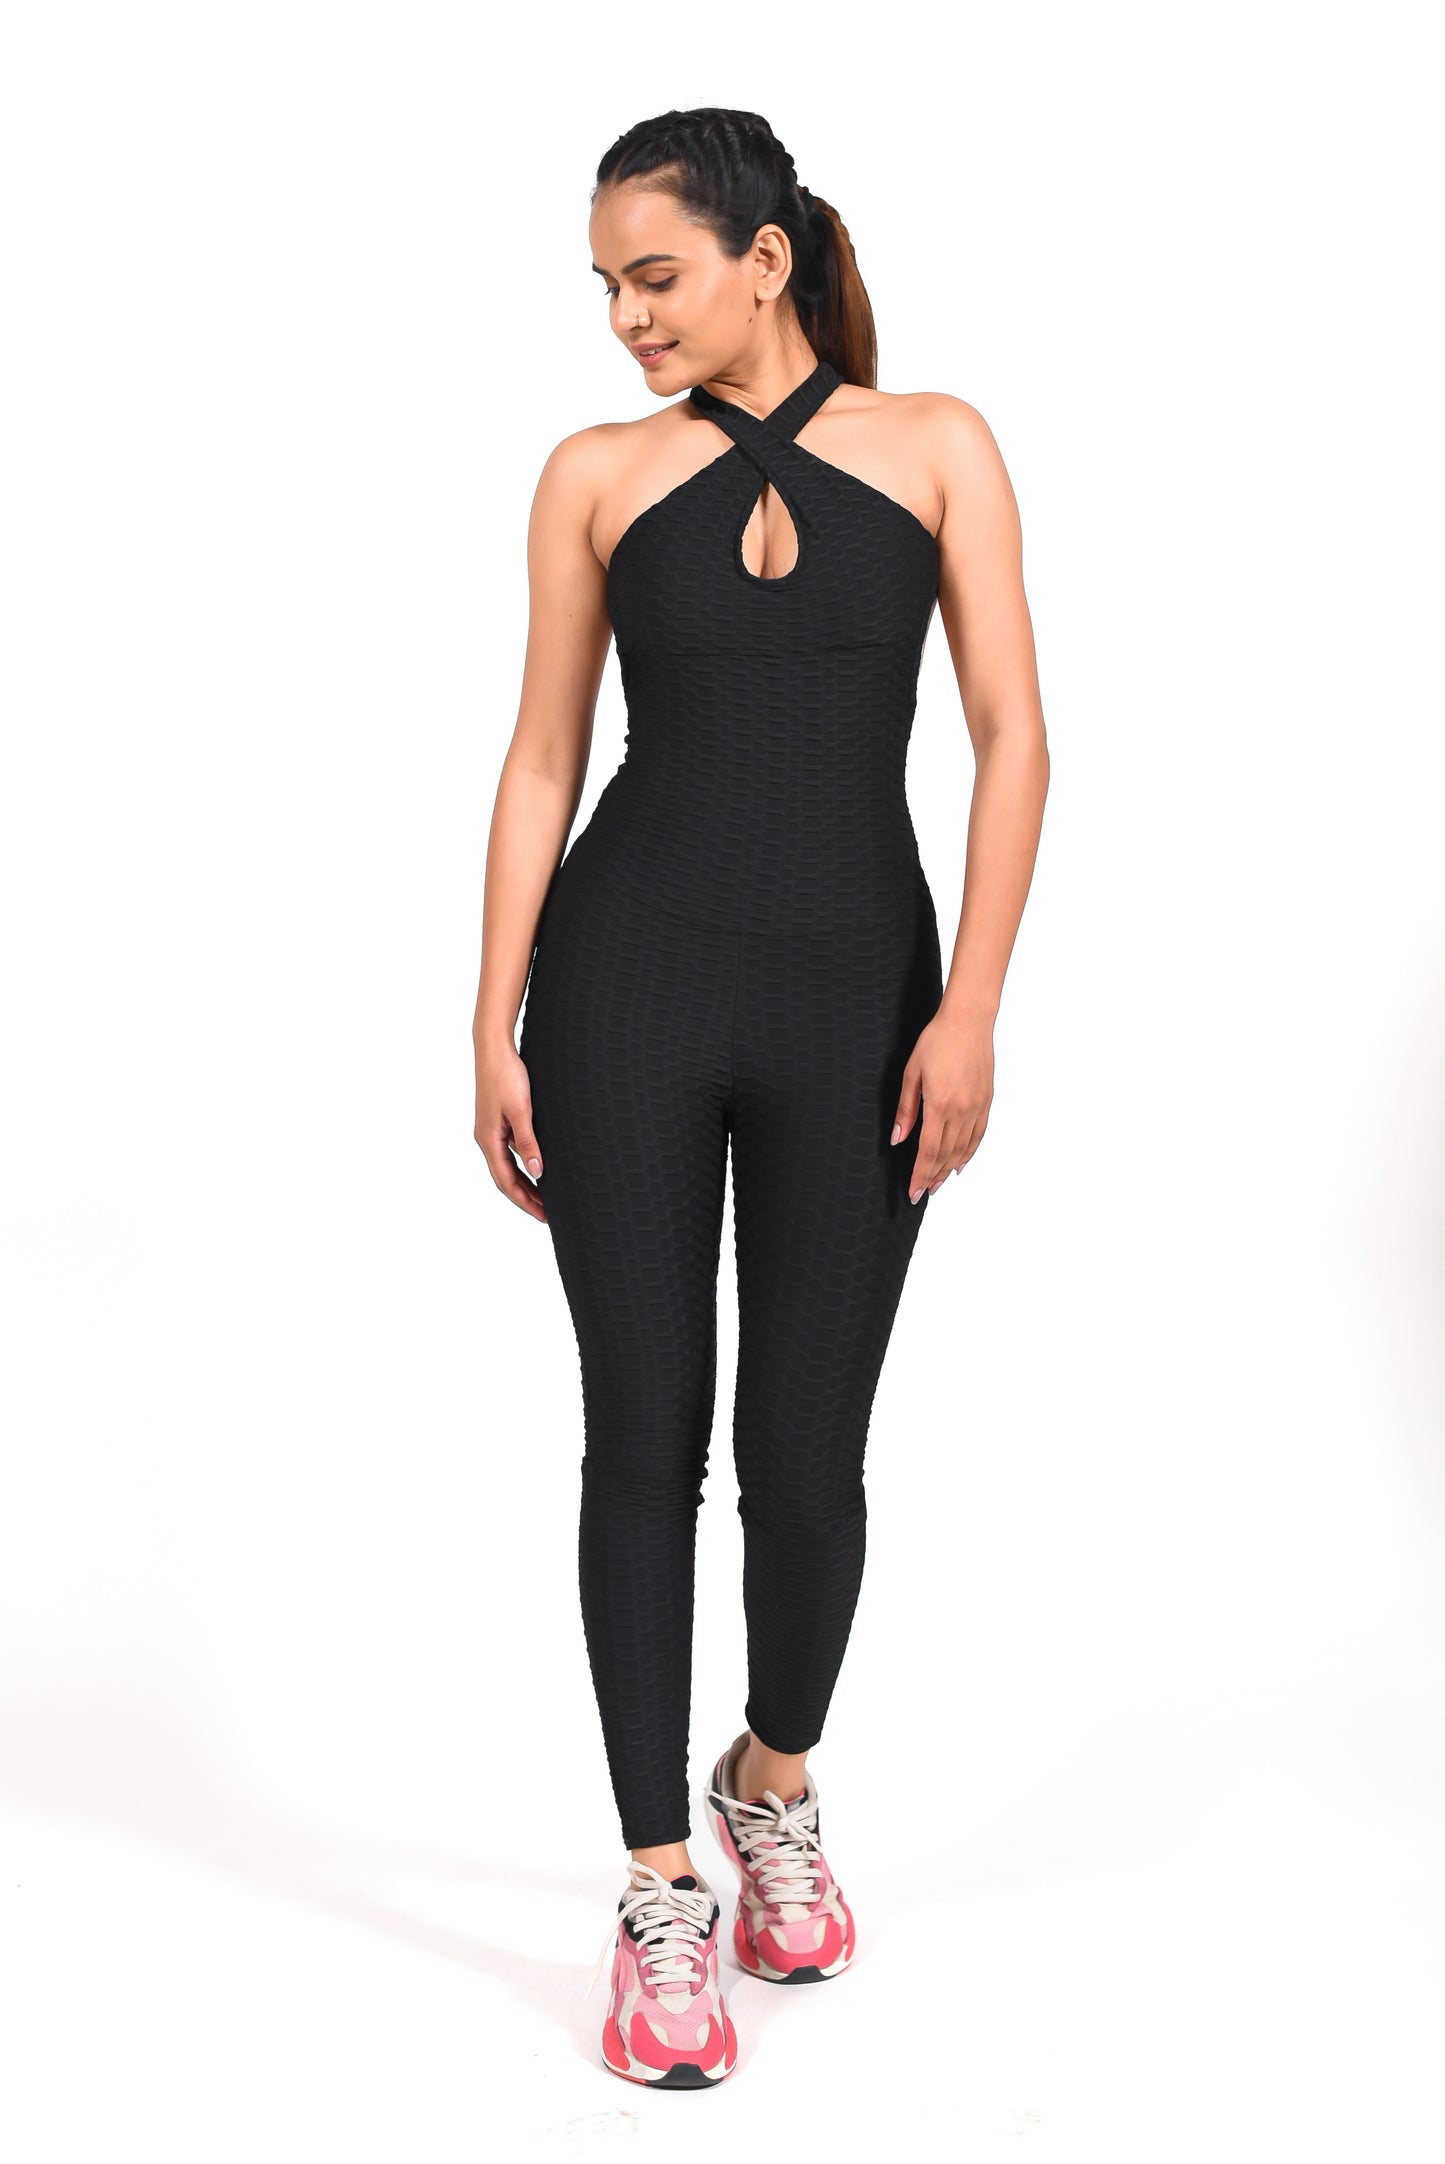 GYMSQUAD® ANTI-CELLULITE AND PUSH UP JUMPSUIT - BLACK